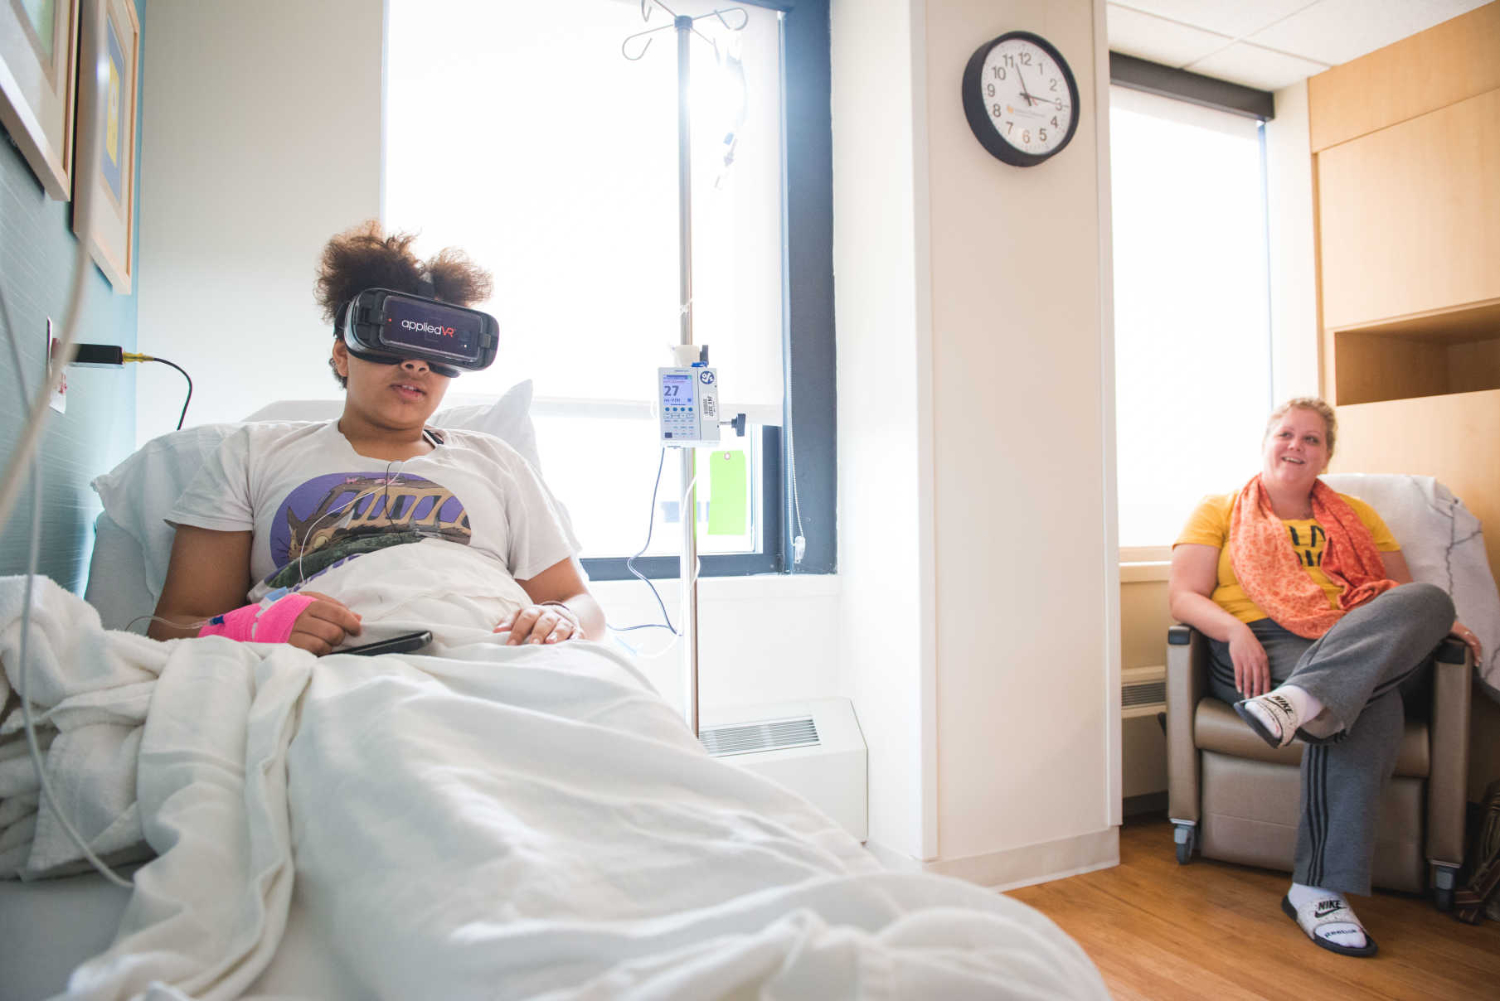 Olivia uses VR during her transfusion while her mother looks on